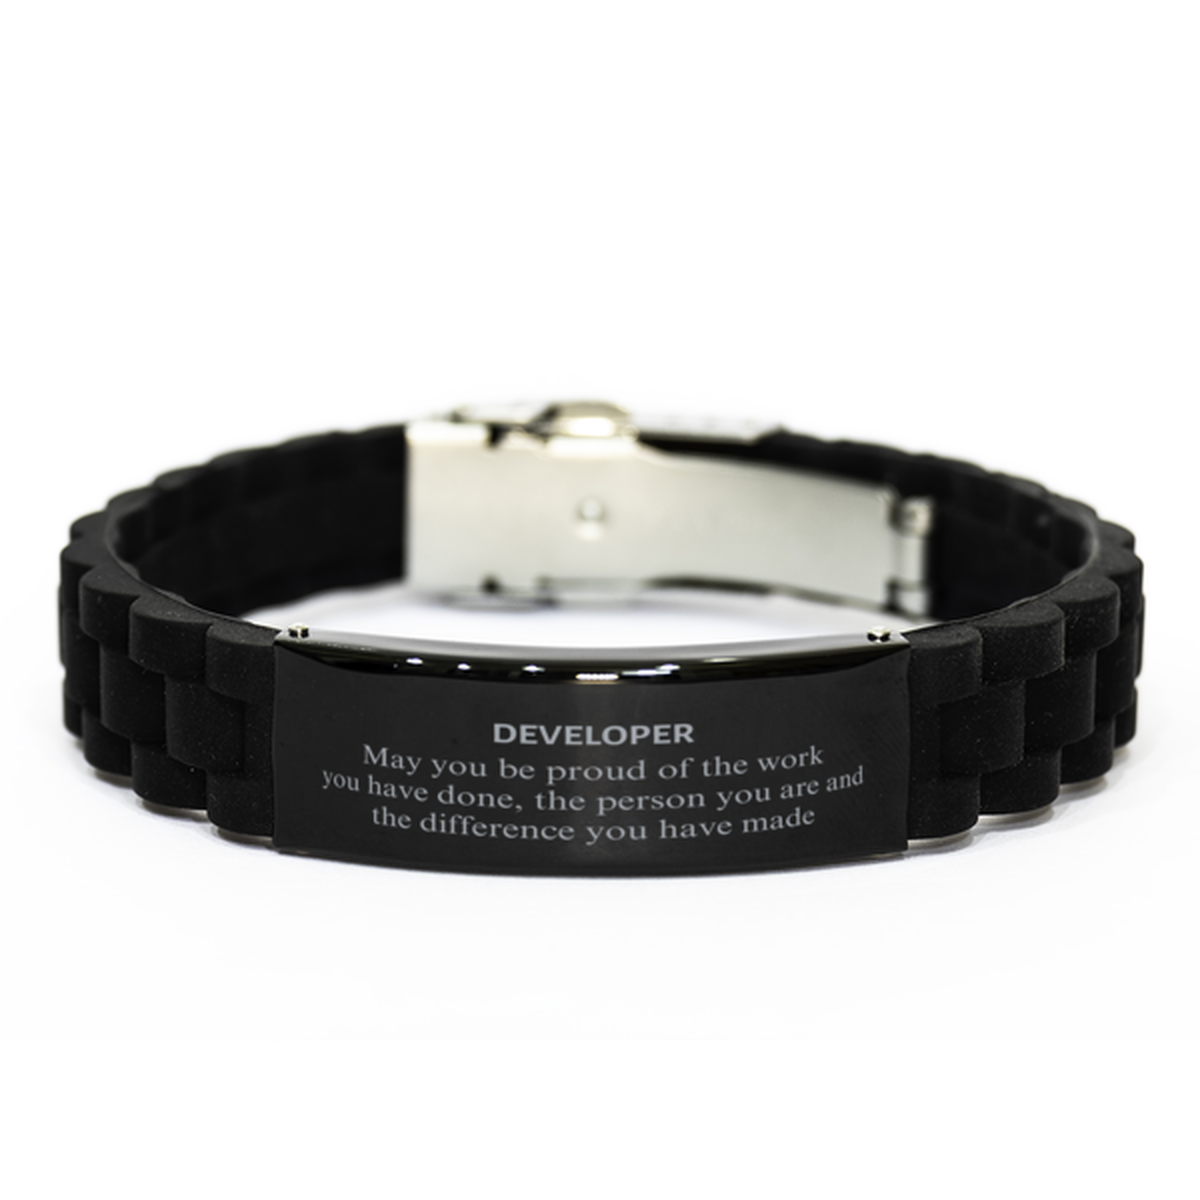 Developer May you be proud of the work you have done, Retirement Developer Black Glidelock Clasp Bracelet for Colleague Appreciation Gifts Amazing for Developer